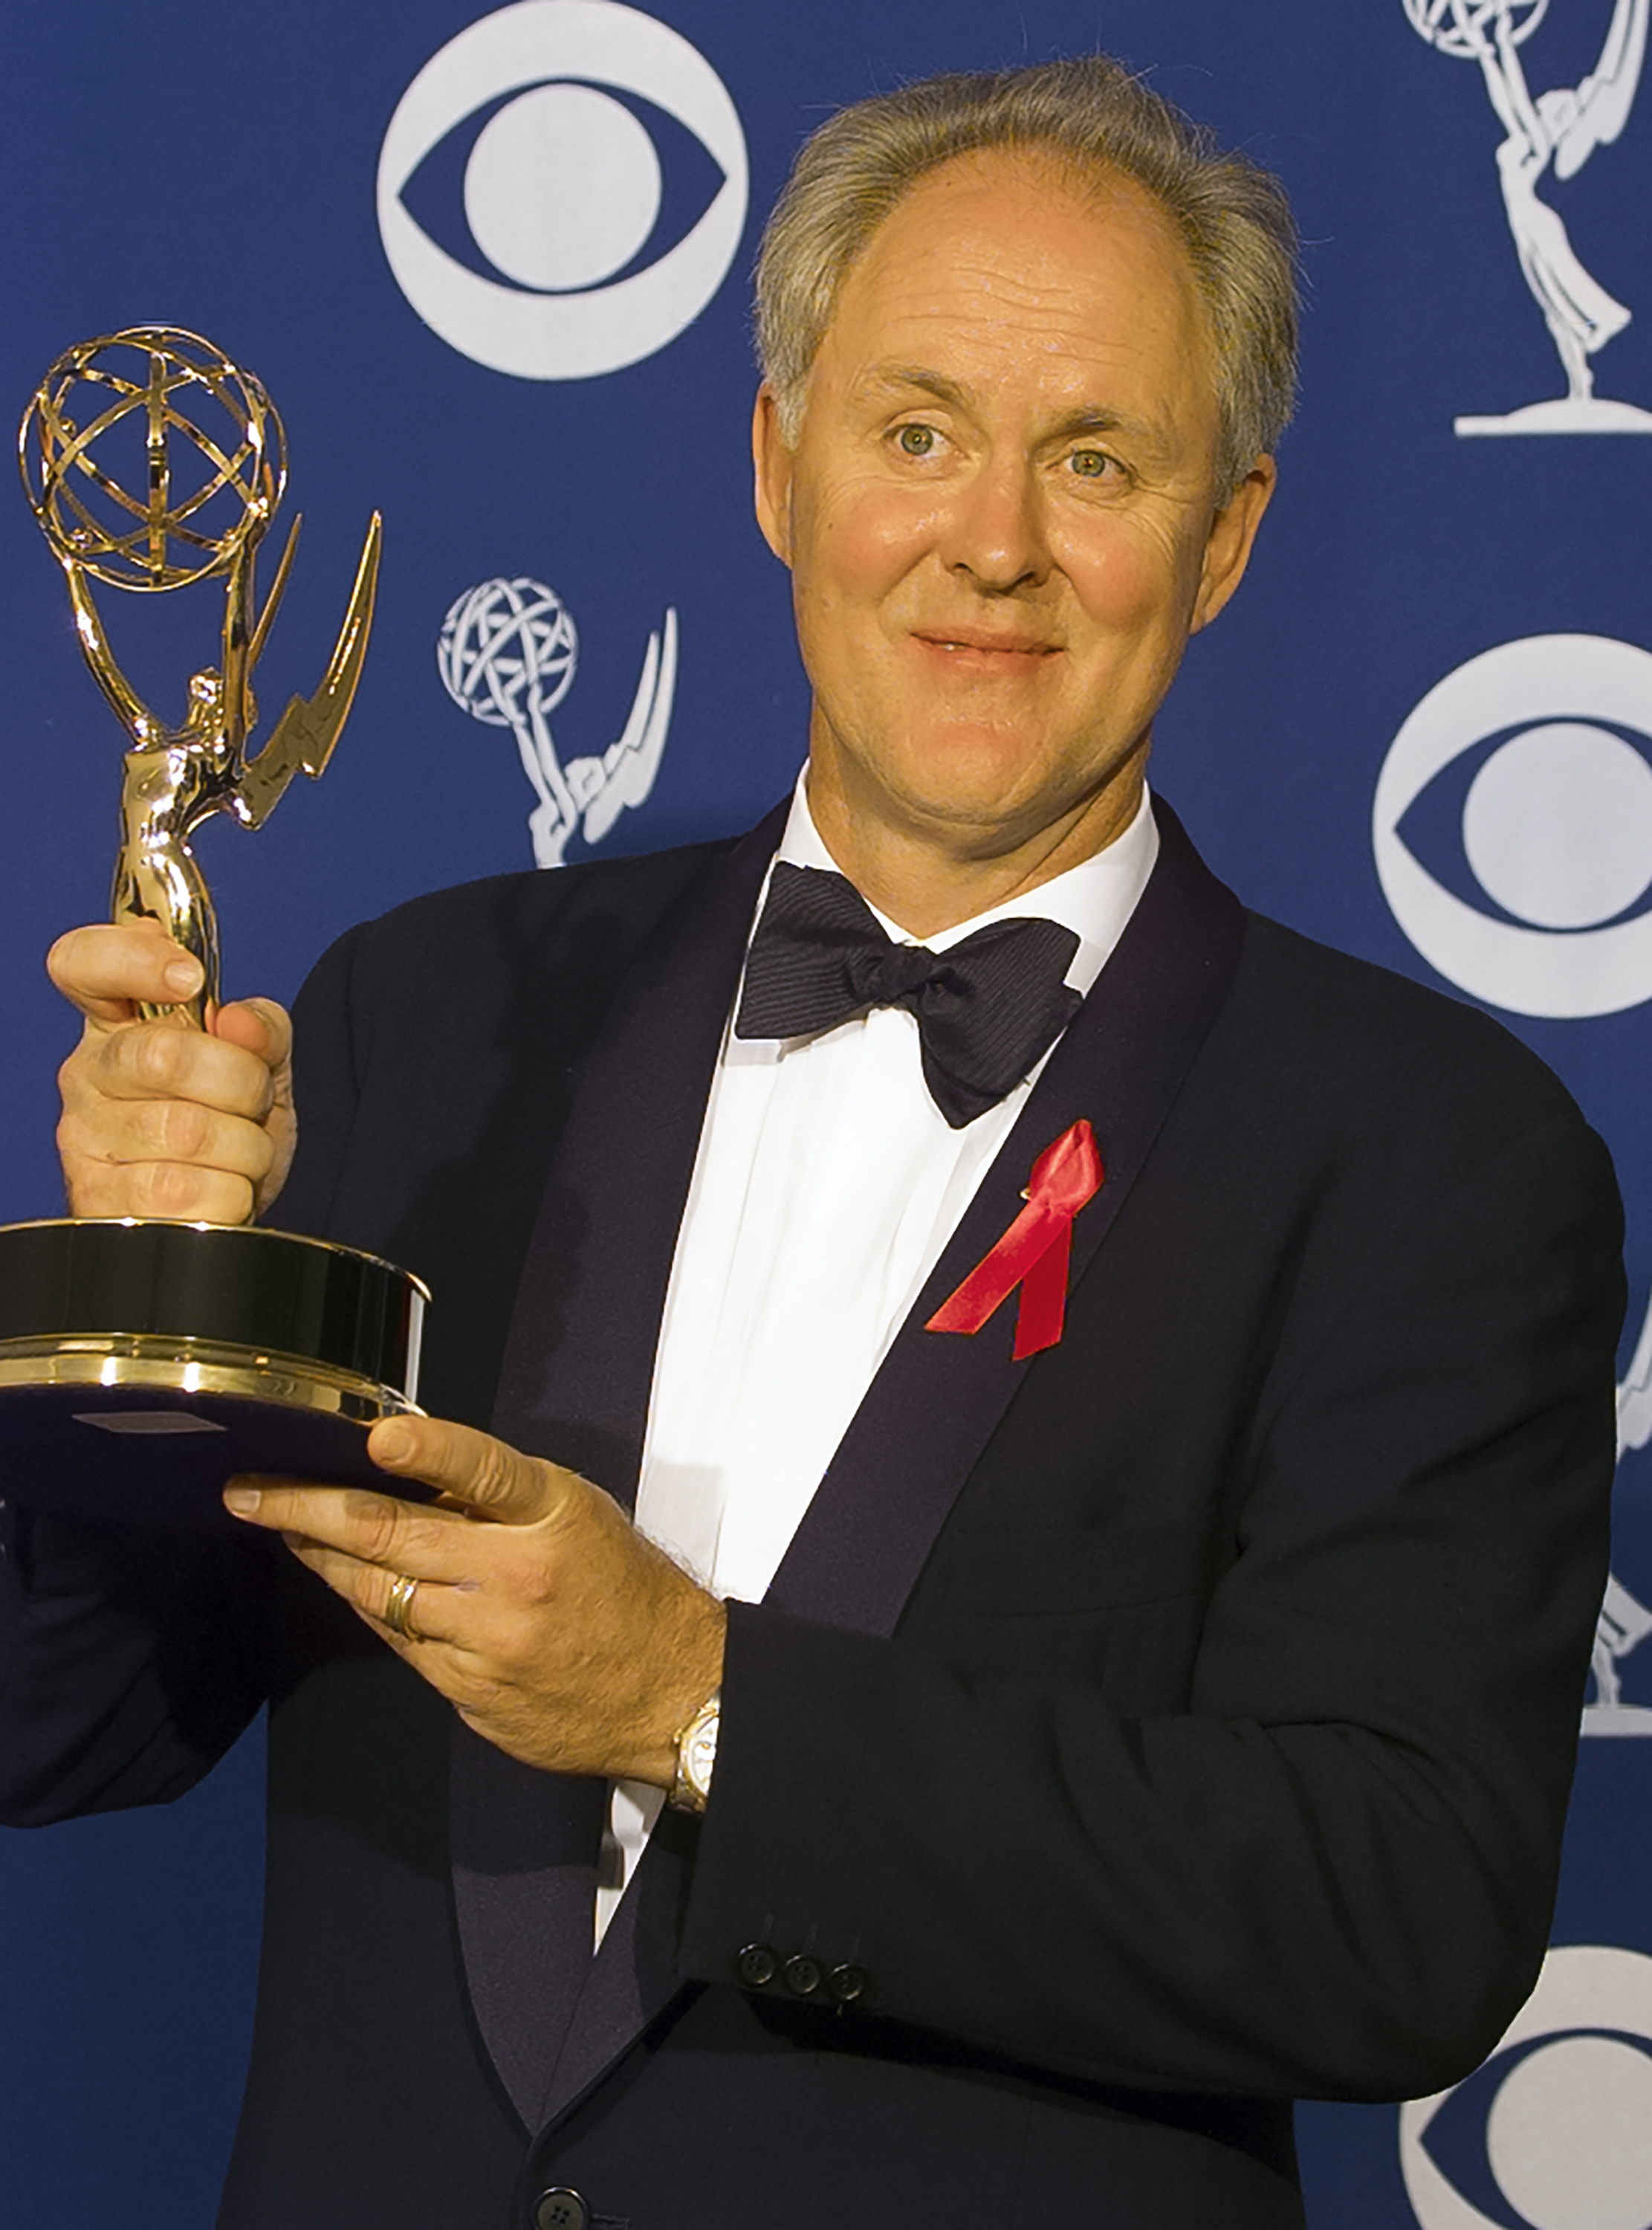 John Lithgow poses backstage with his award at the Emmy Awards Show on September 14, 1997, in Pasadena, California | Source: Getty Images